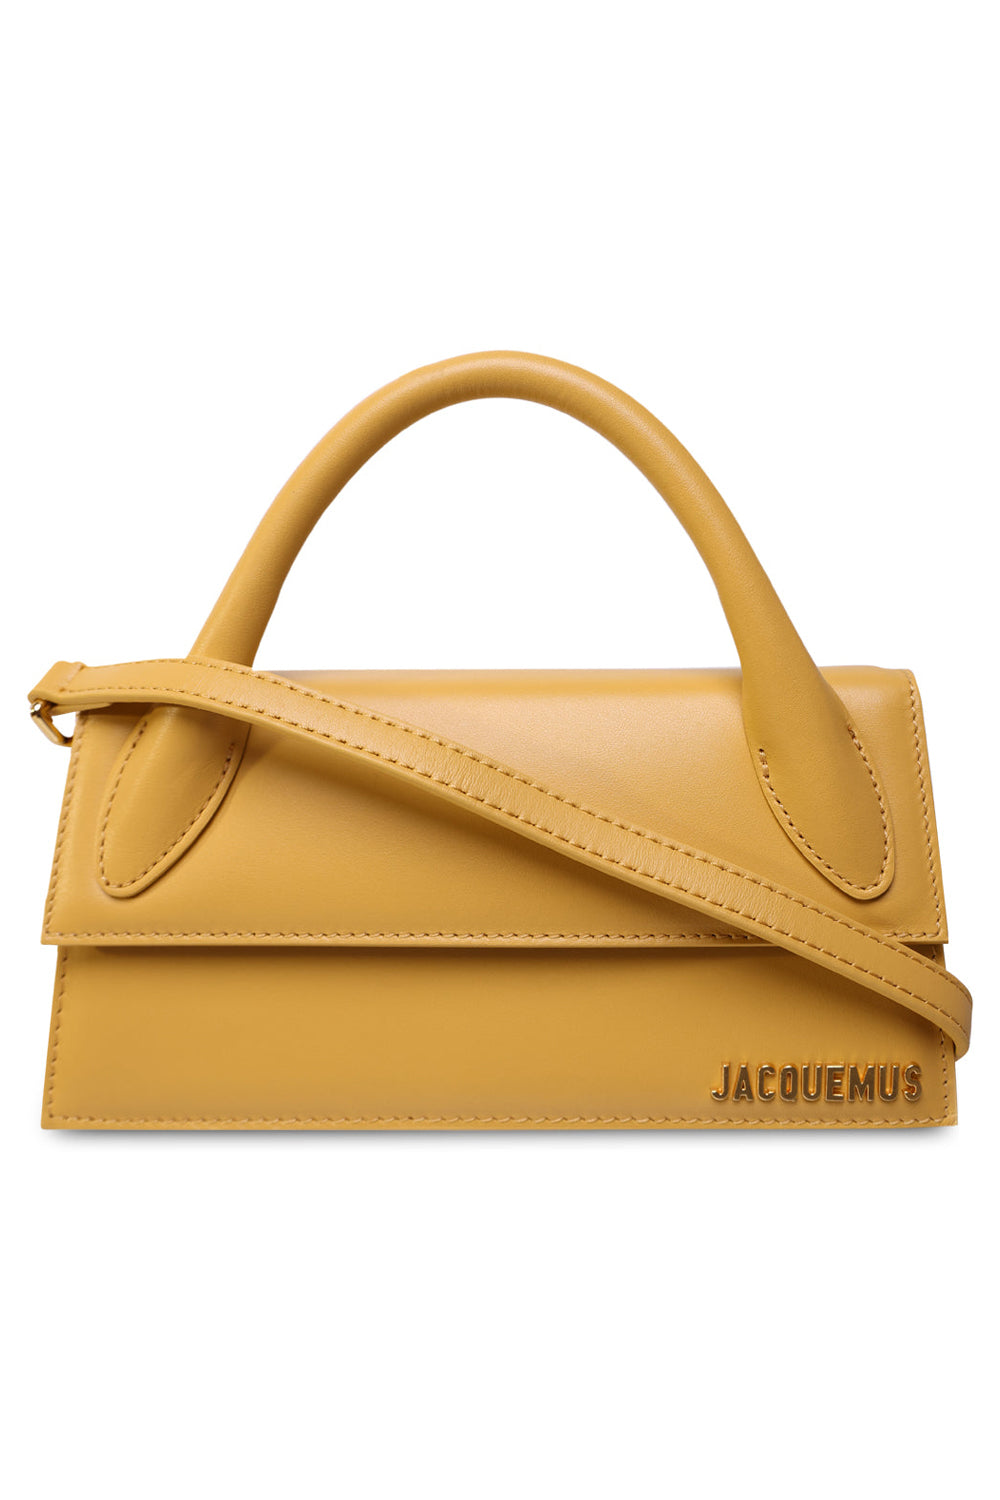 Jacquemus : Le Chiquito Long Bag: Review and what fits inside! 